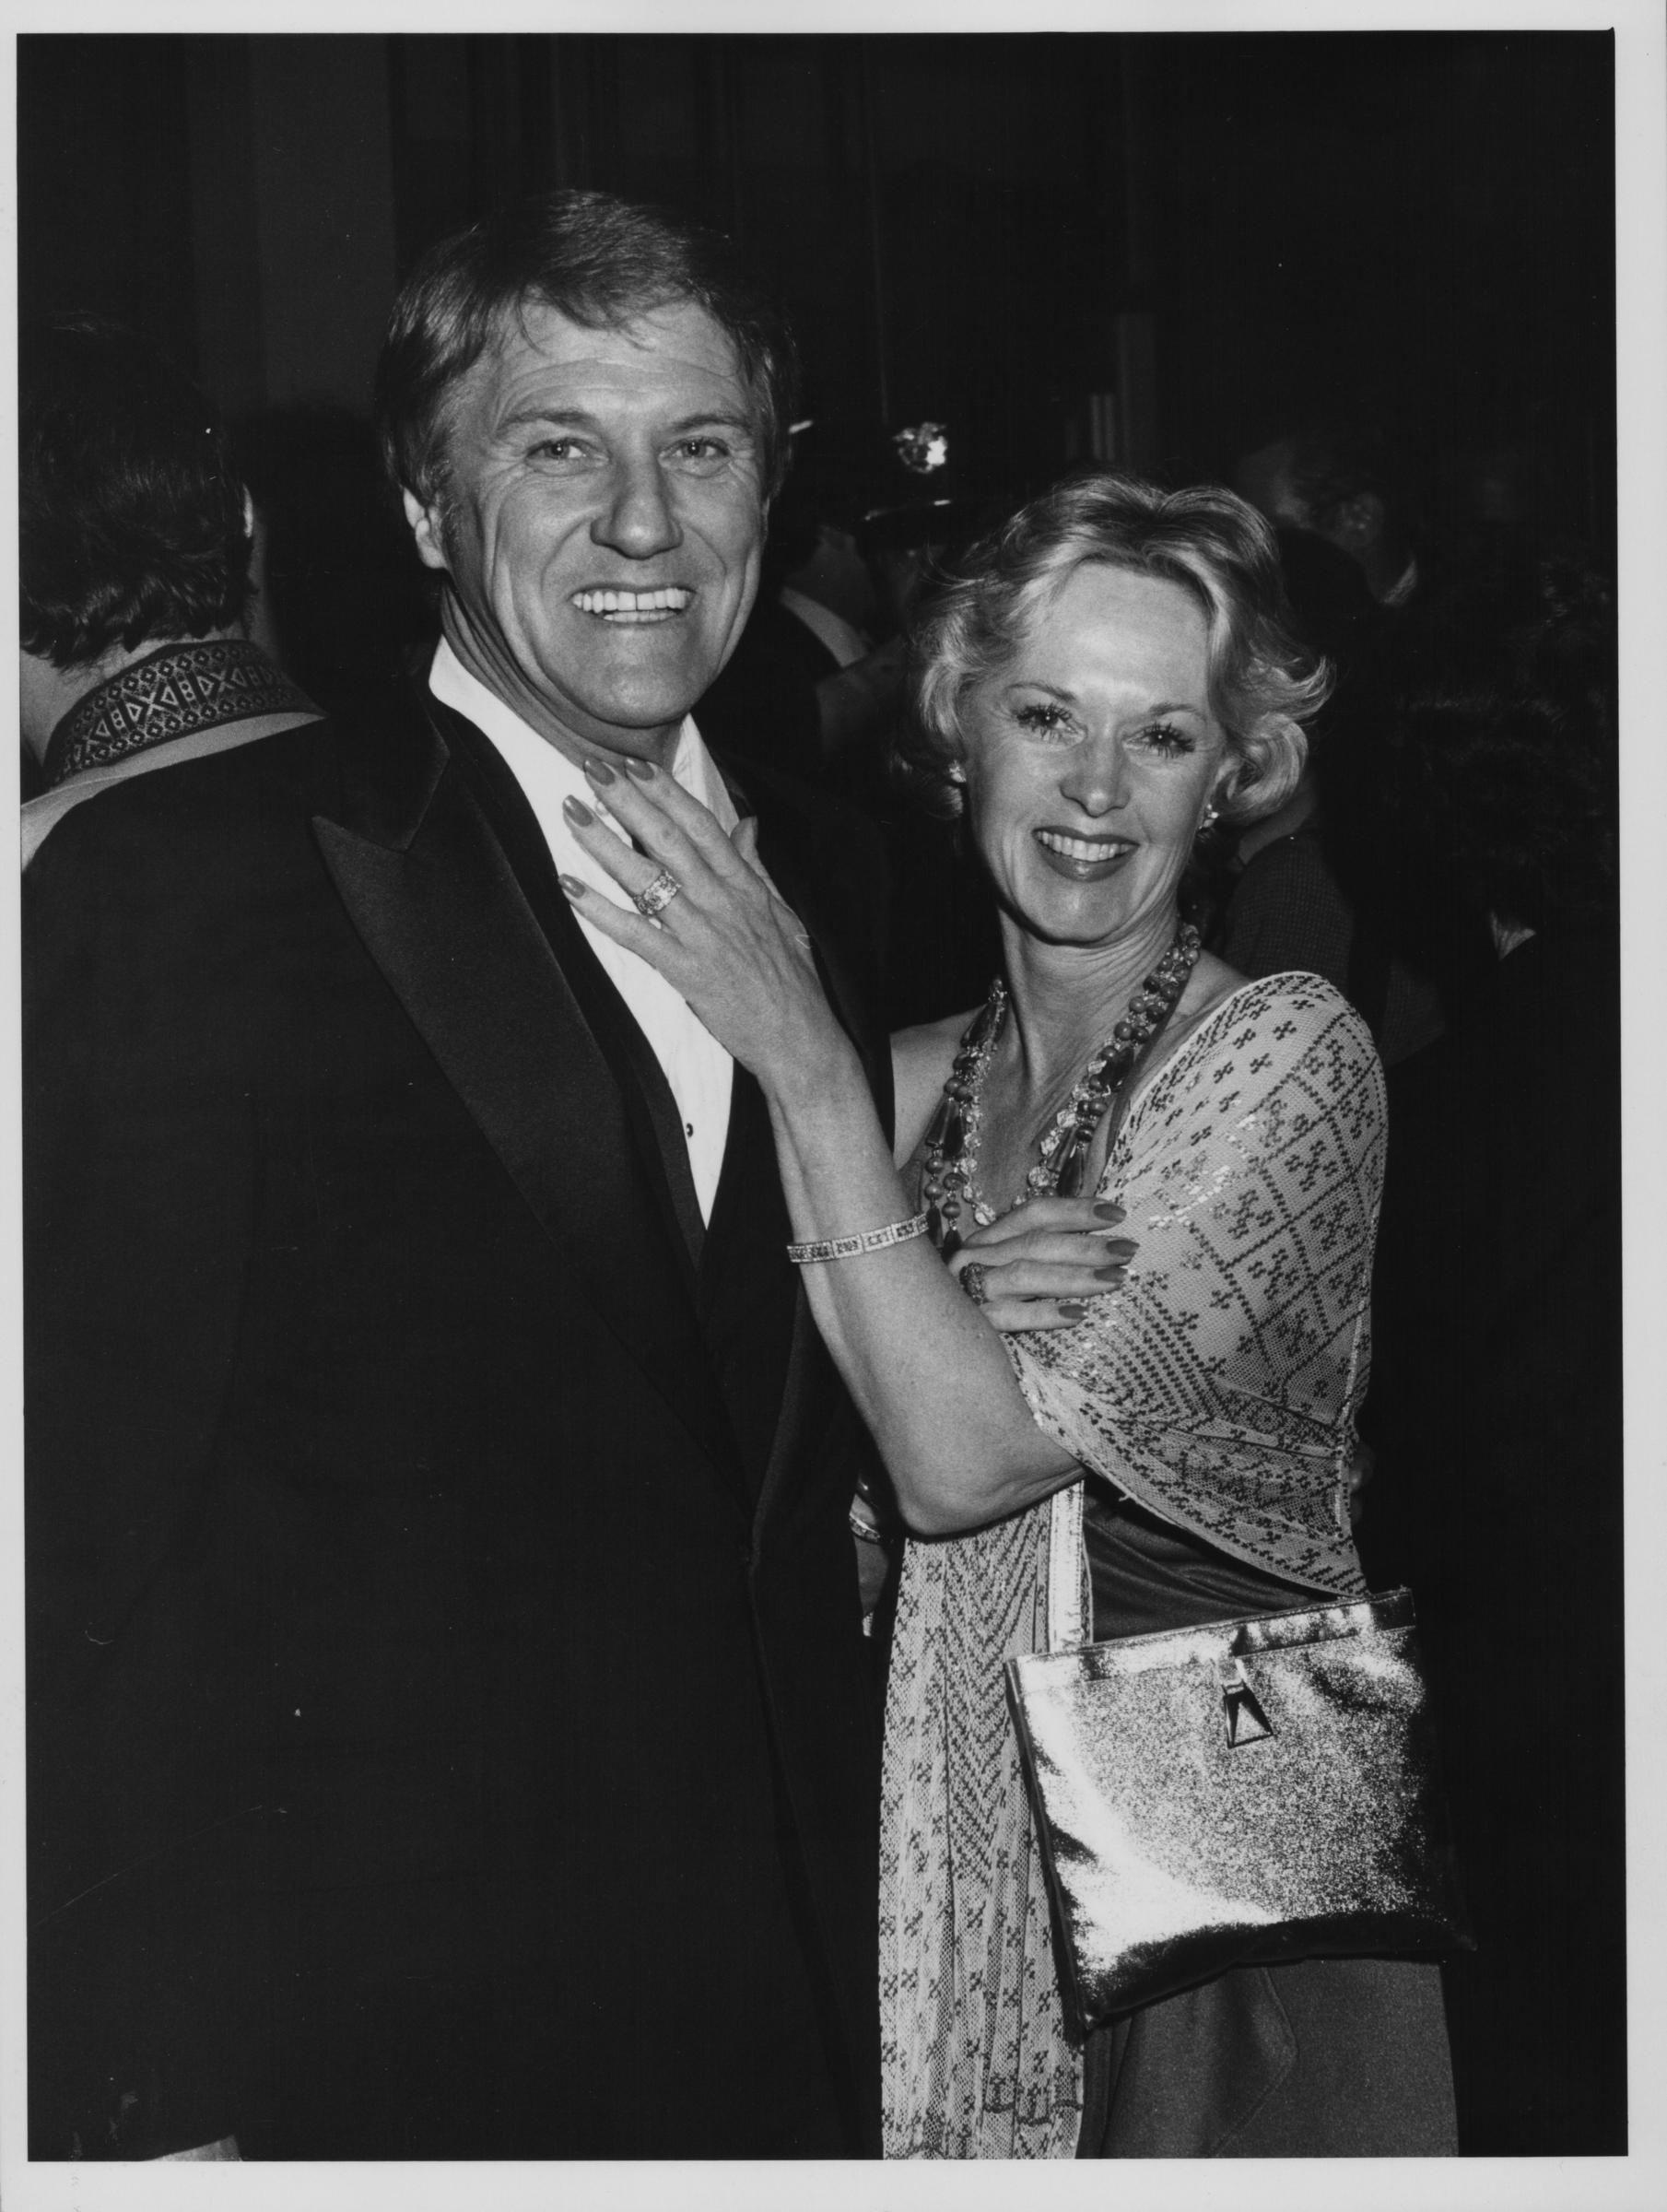 Noel Marshall and Tippi Hedren attending the Directors Guild of America Awards, in Beverly Hill Hilton, California, on March 14, 1981. | Source: Getty Images